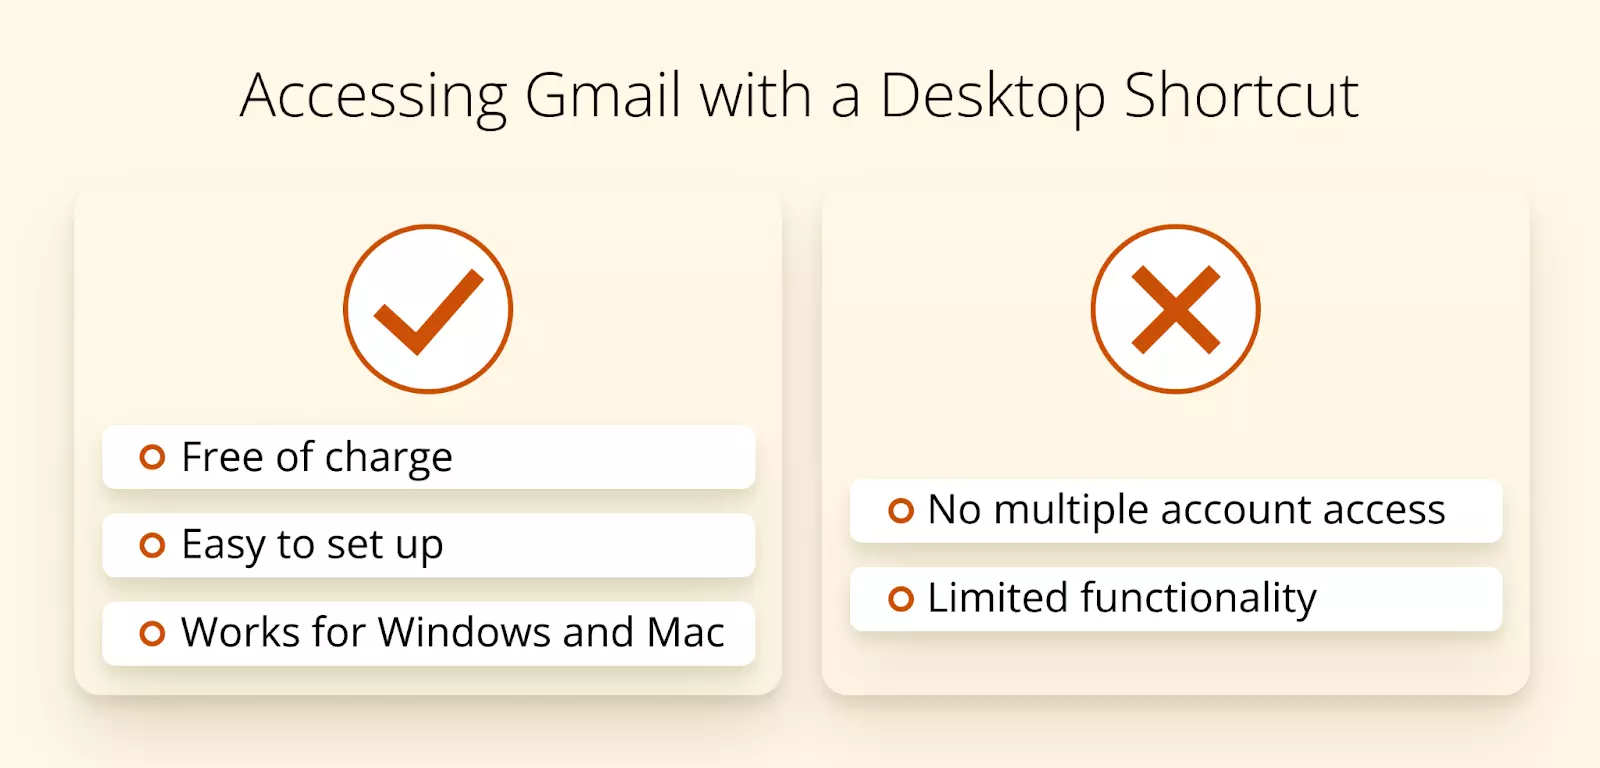 Pros and cons of accessing Gmail with a desktop shortcut